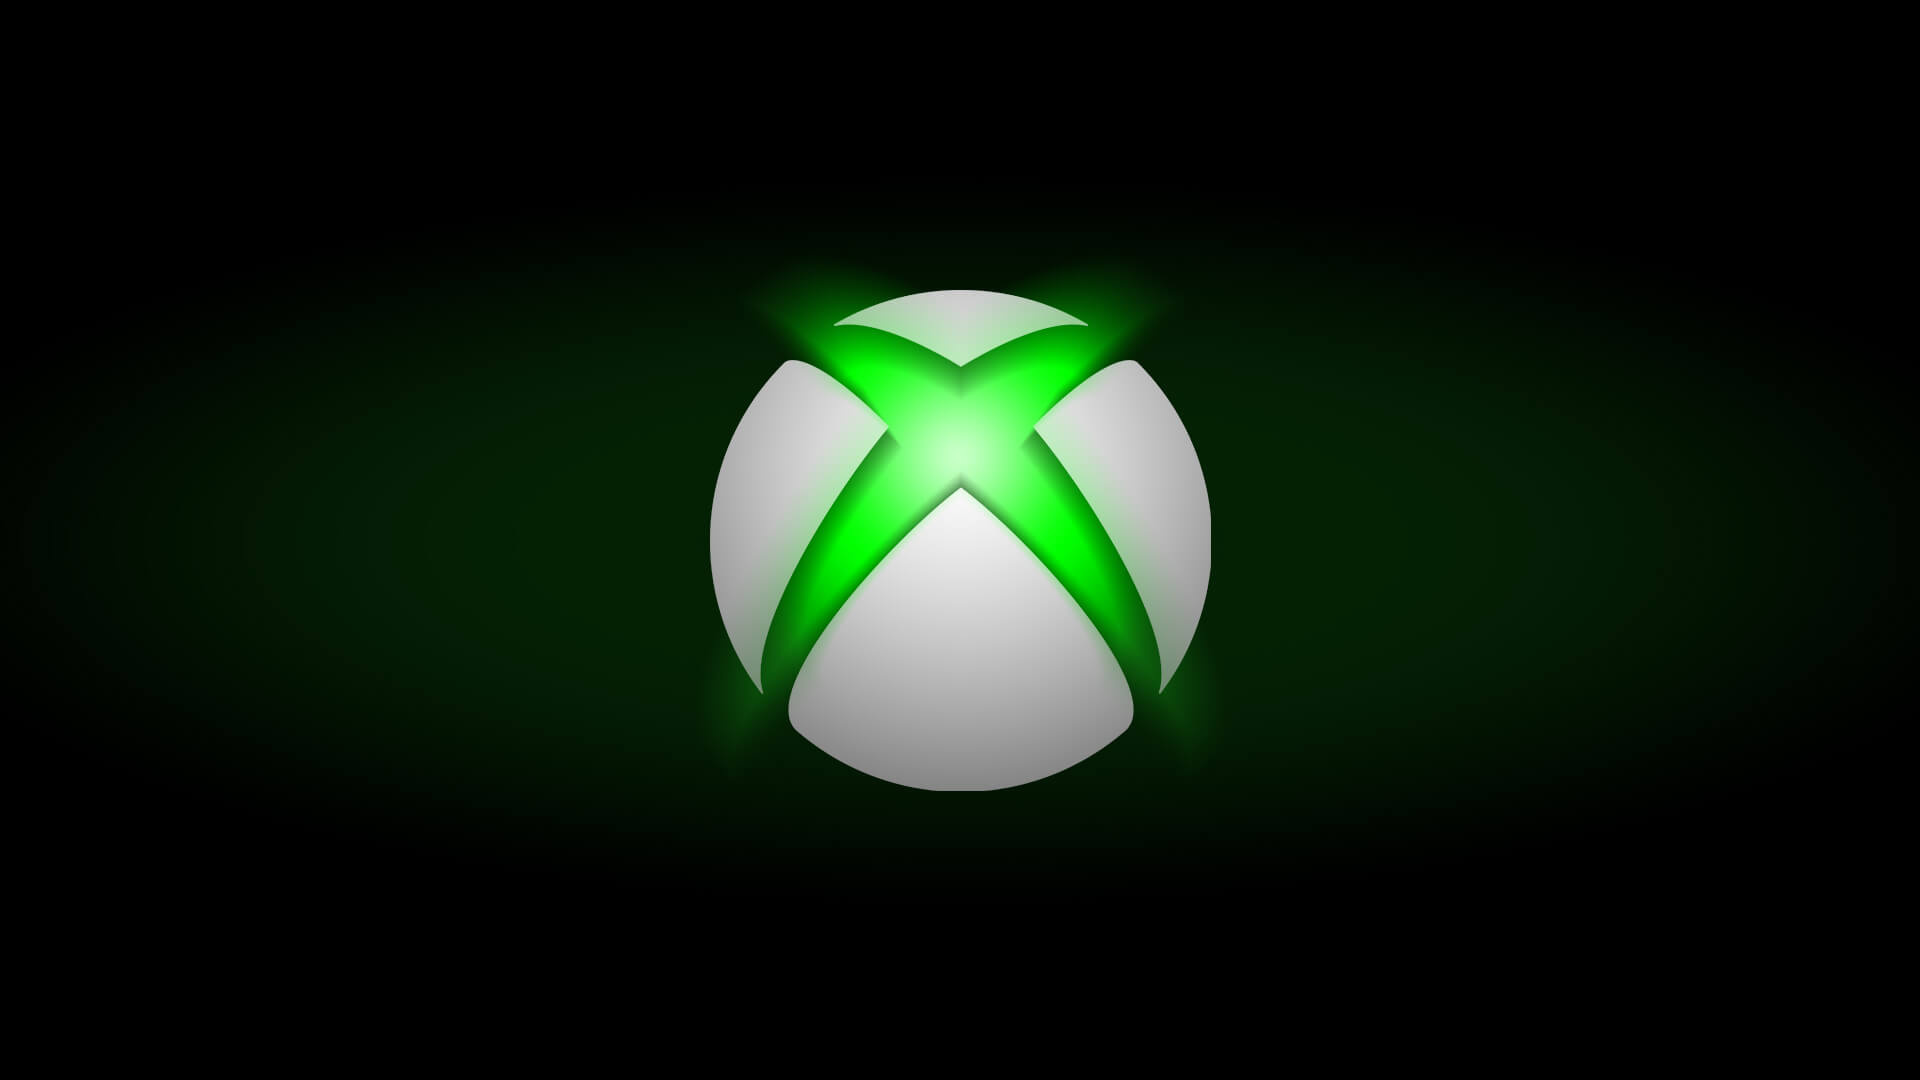 Xbox: Microsoft's first foray in the gaming console market, Logo. 1920x1080 Full HD Background.